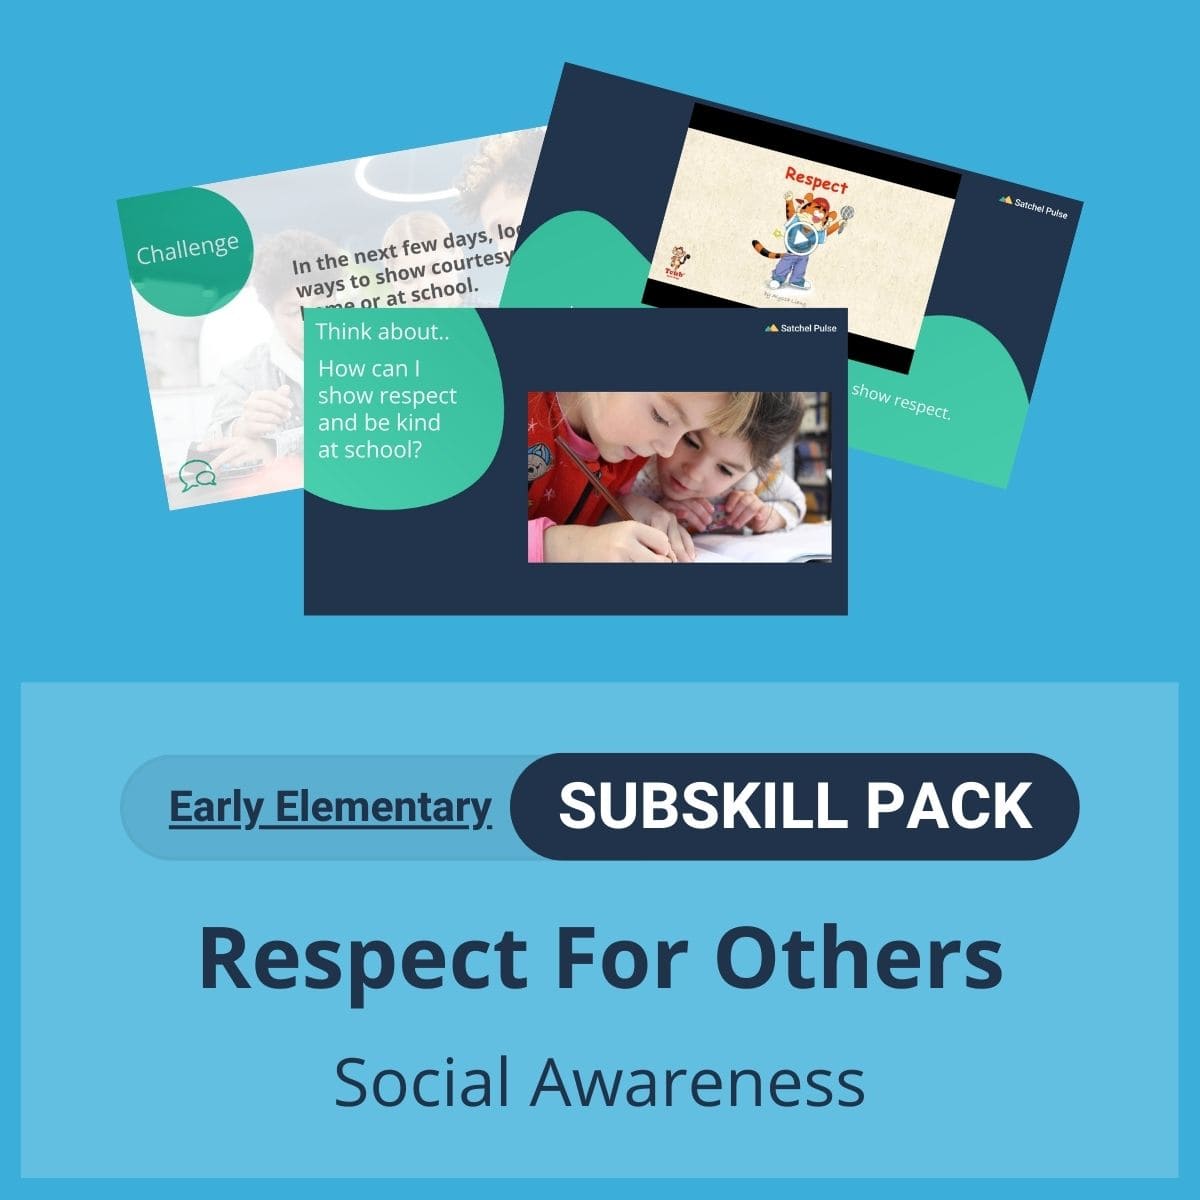 SEL Resource pack with social-emotional learning lessons and self-studies to help you teach Respect For Others in your classroom as a part of the SEL curriculum.